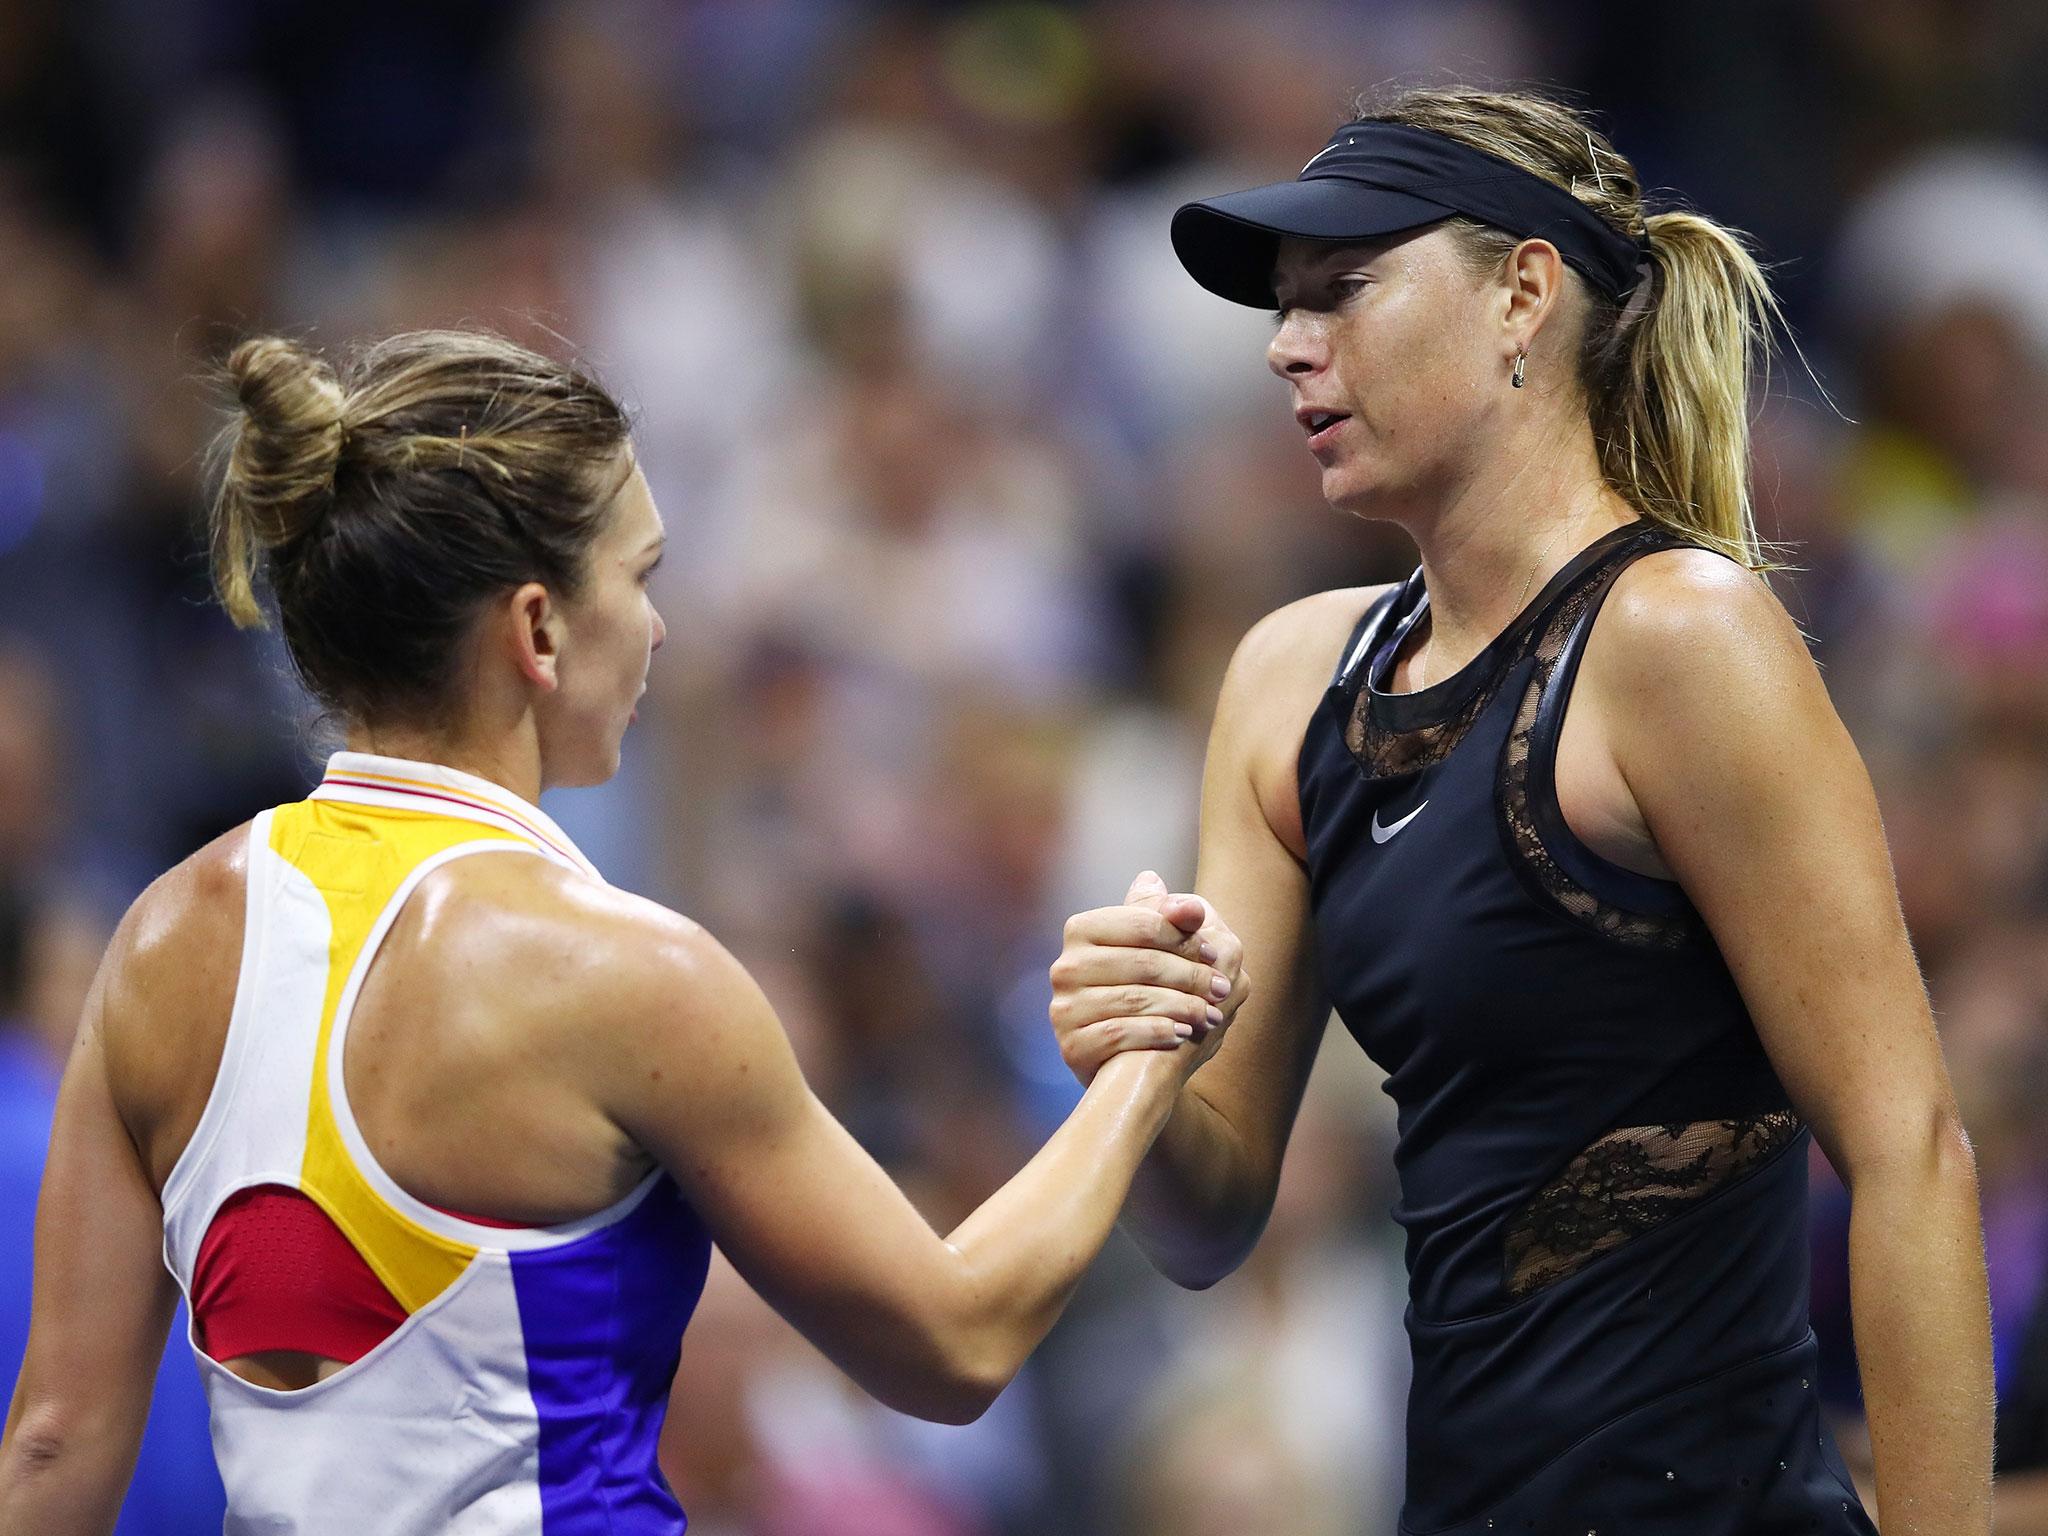 &#13;
Sharapova was visibly emotional after seeing off world number two Halep &#13;